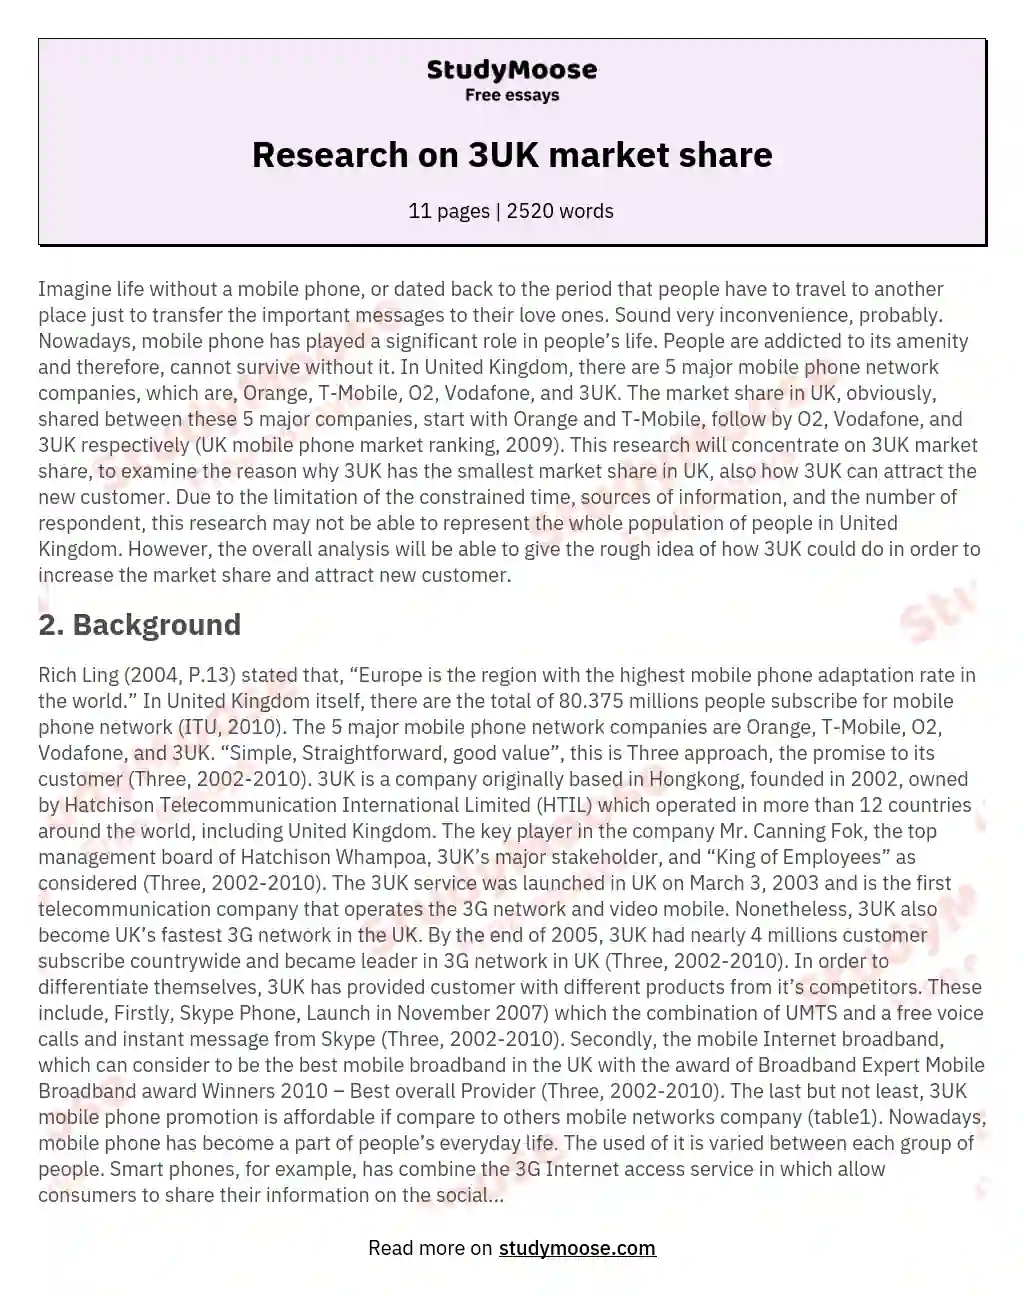 Research on 3UK market share essay